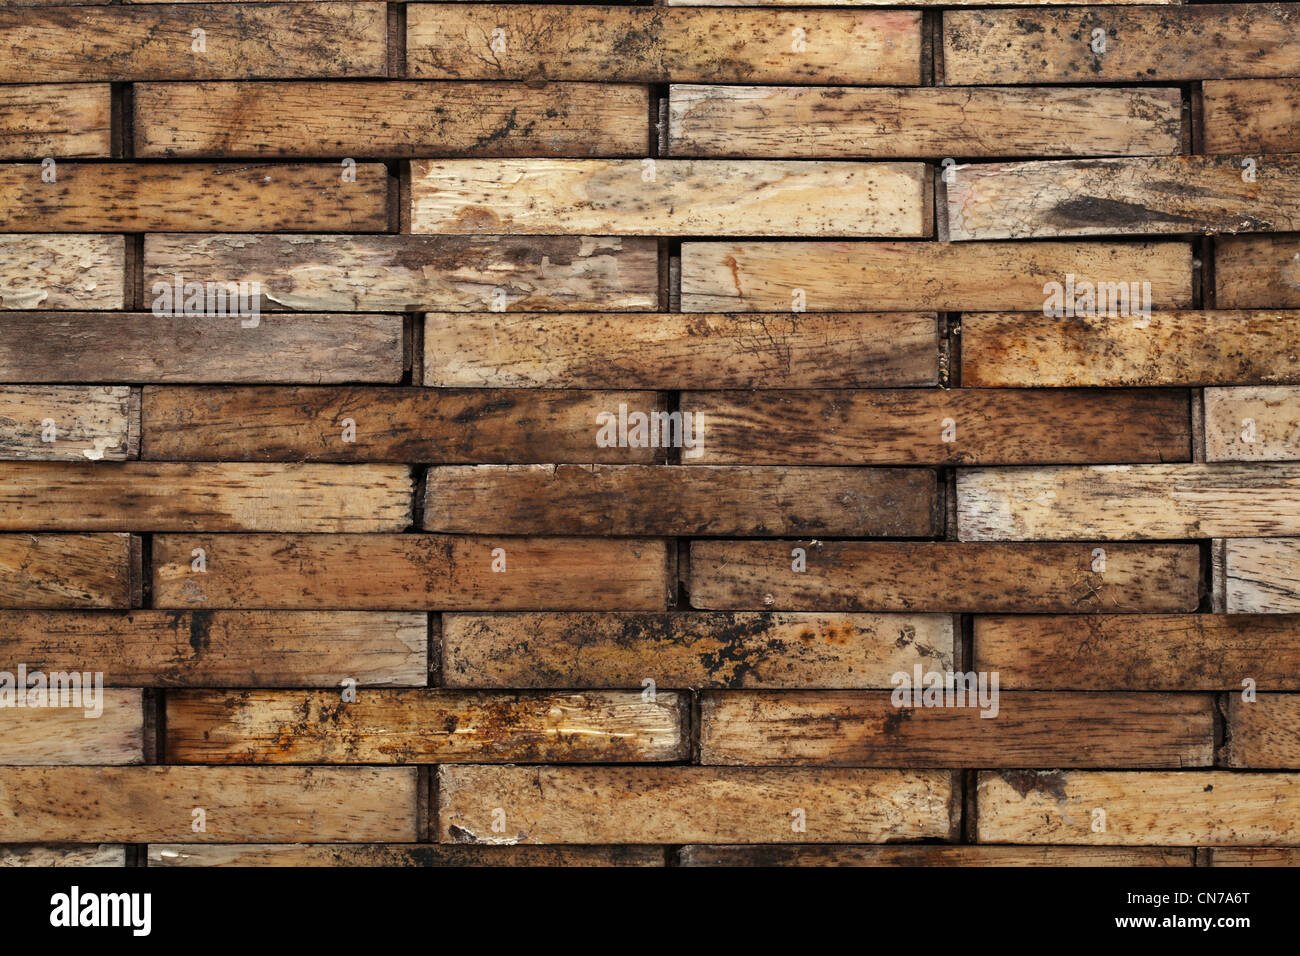 Old dirty wooden wall Stock Photo